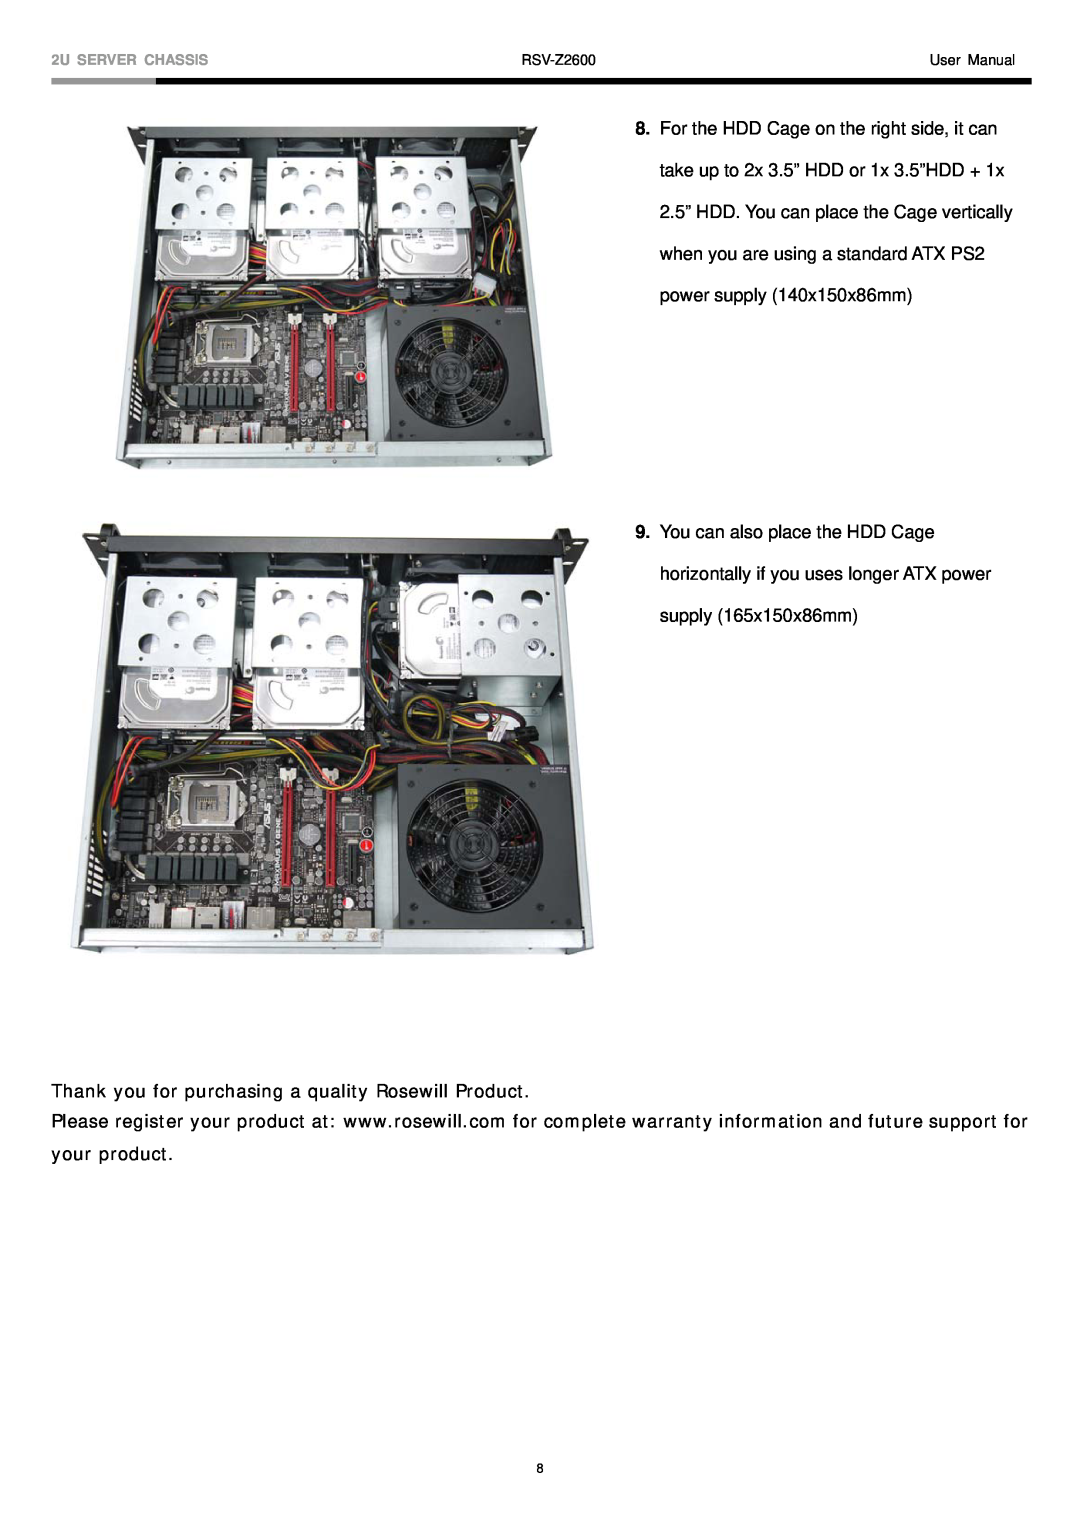 Rosewill RSV-Z2600 user manual Thank you for purchasing a quality Rosewill Product 